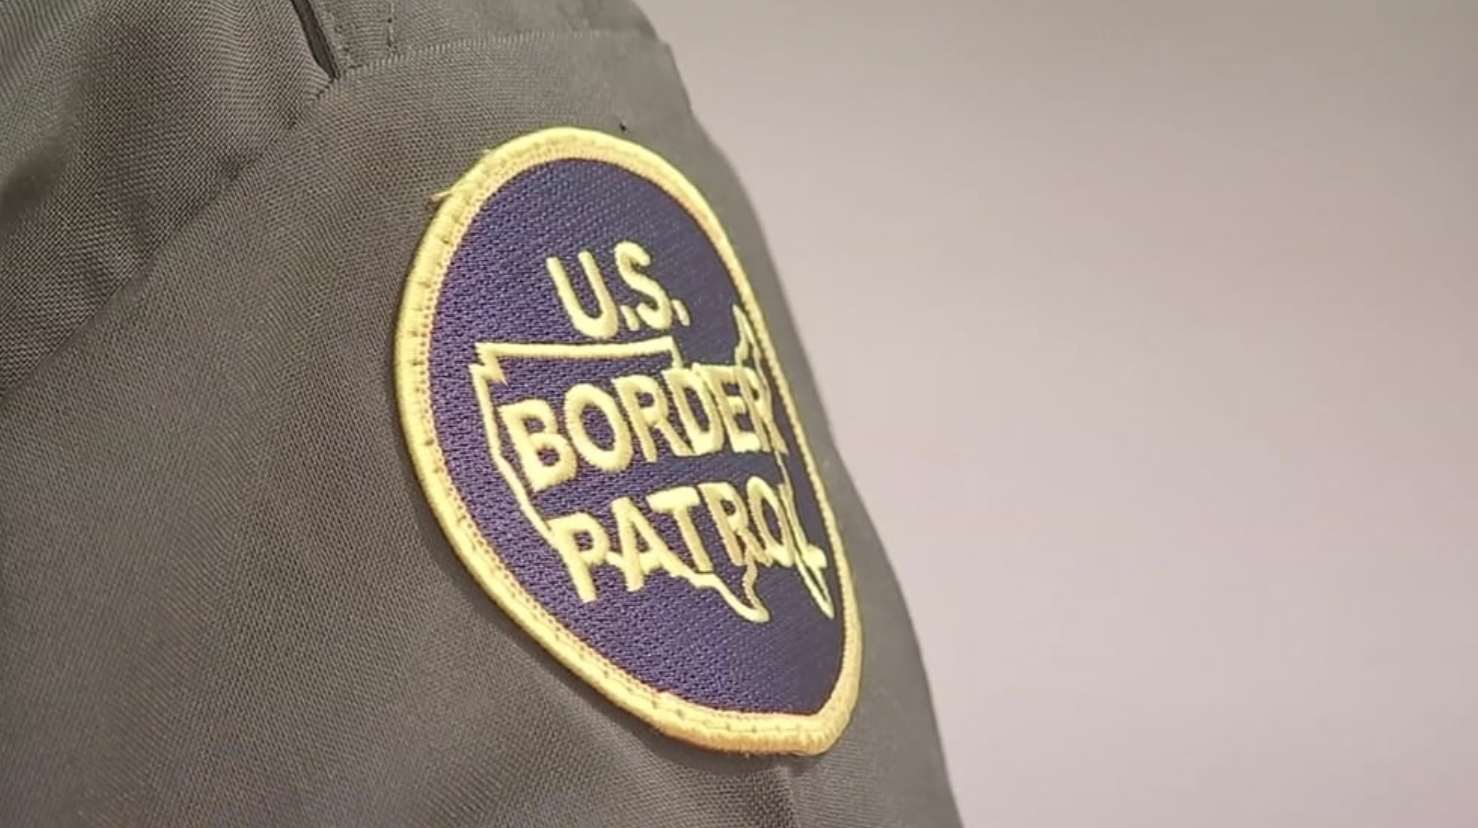 Some Republicans Want to Boost Border Security- At the Northern Border